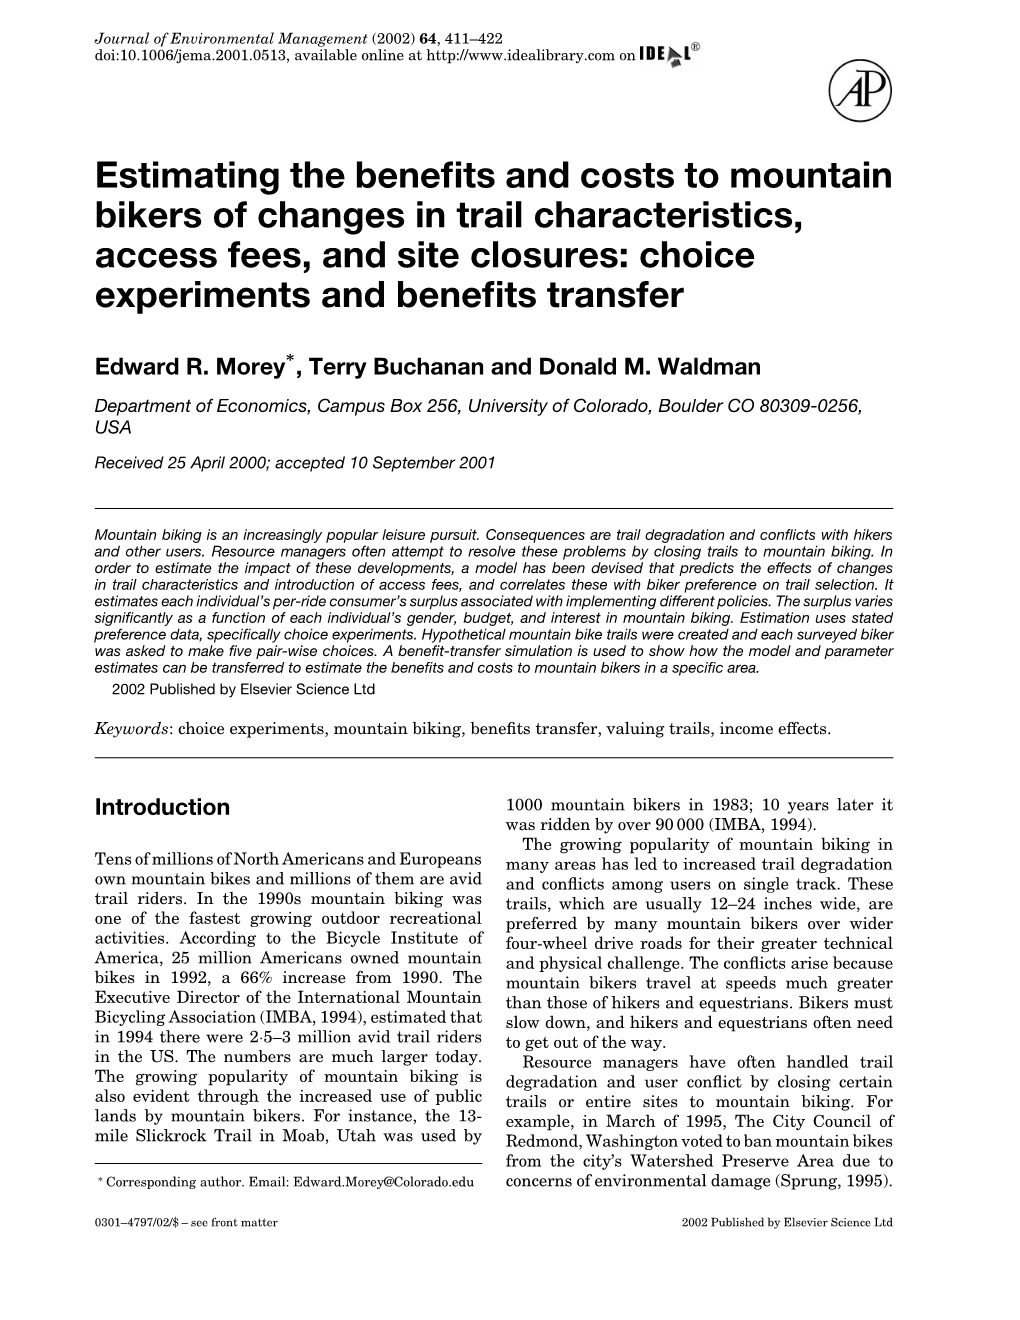 Estimating the Benefits and Costs to Mountain Bikers of Changes in Trail Characteristics, Access Fees, and Site Closures